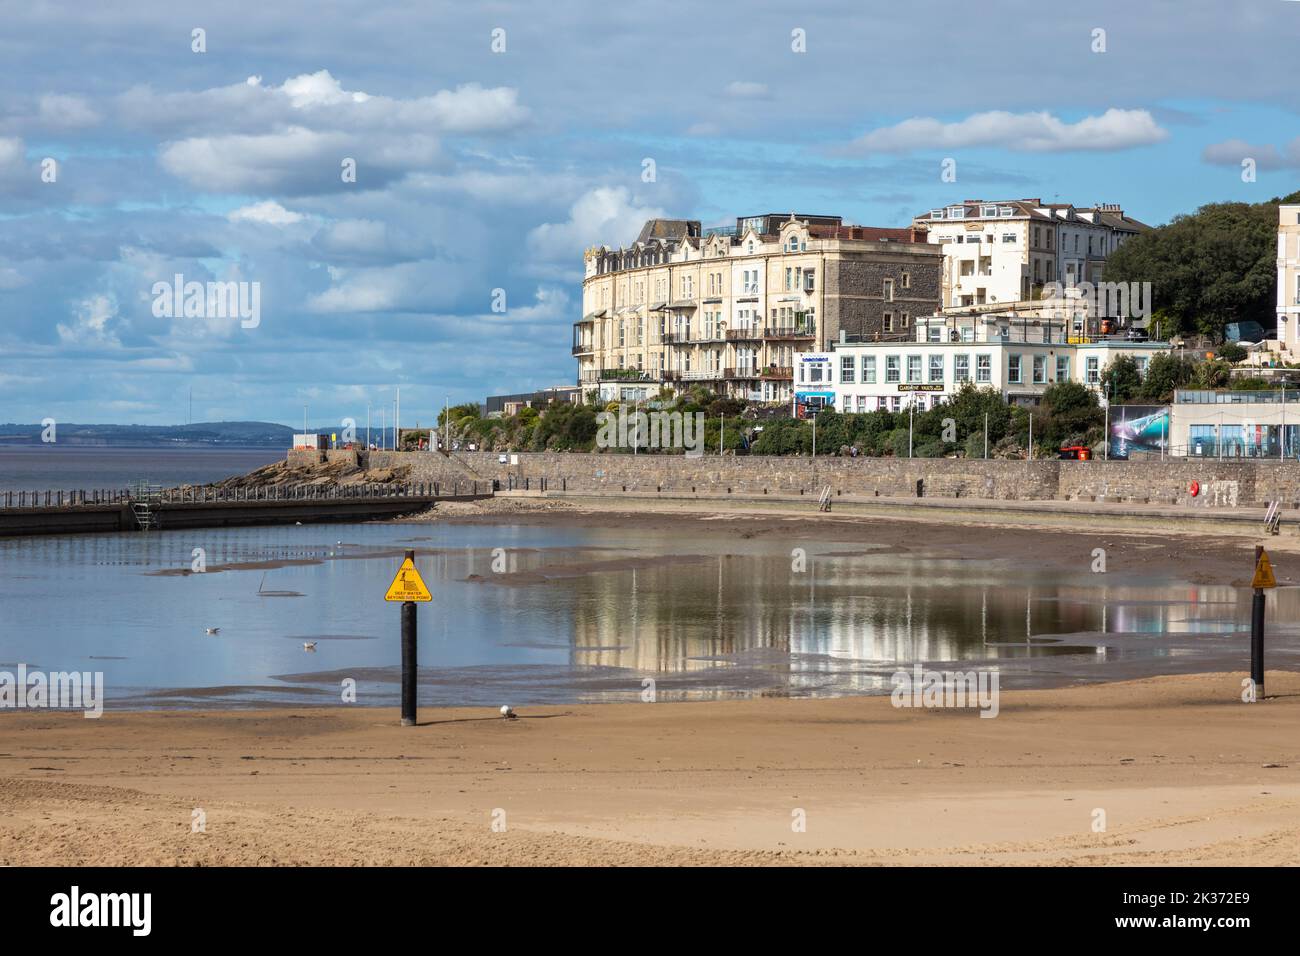 Seafront Hotels along Birnbeck Road in Weston Super Mare overlooking Marine Lake, North Somerset, England, UK Stock Photo